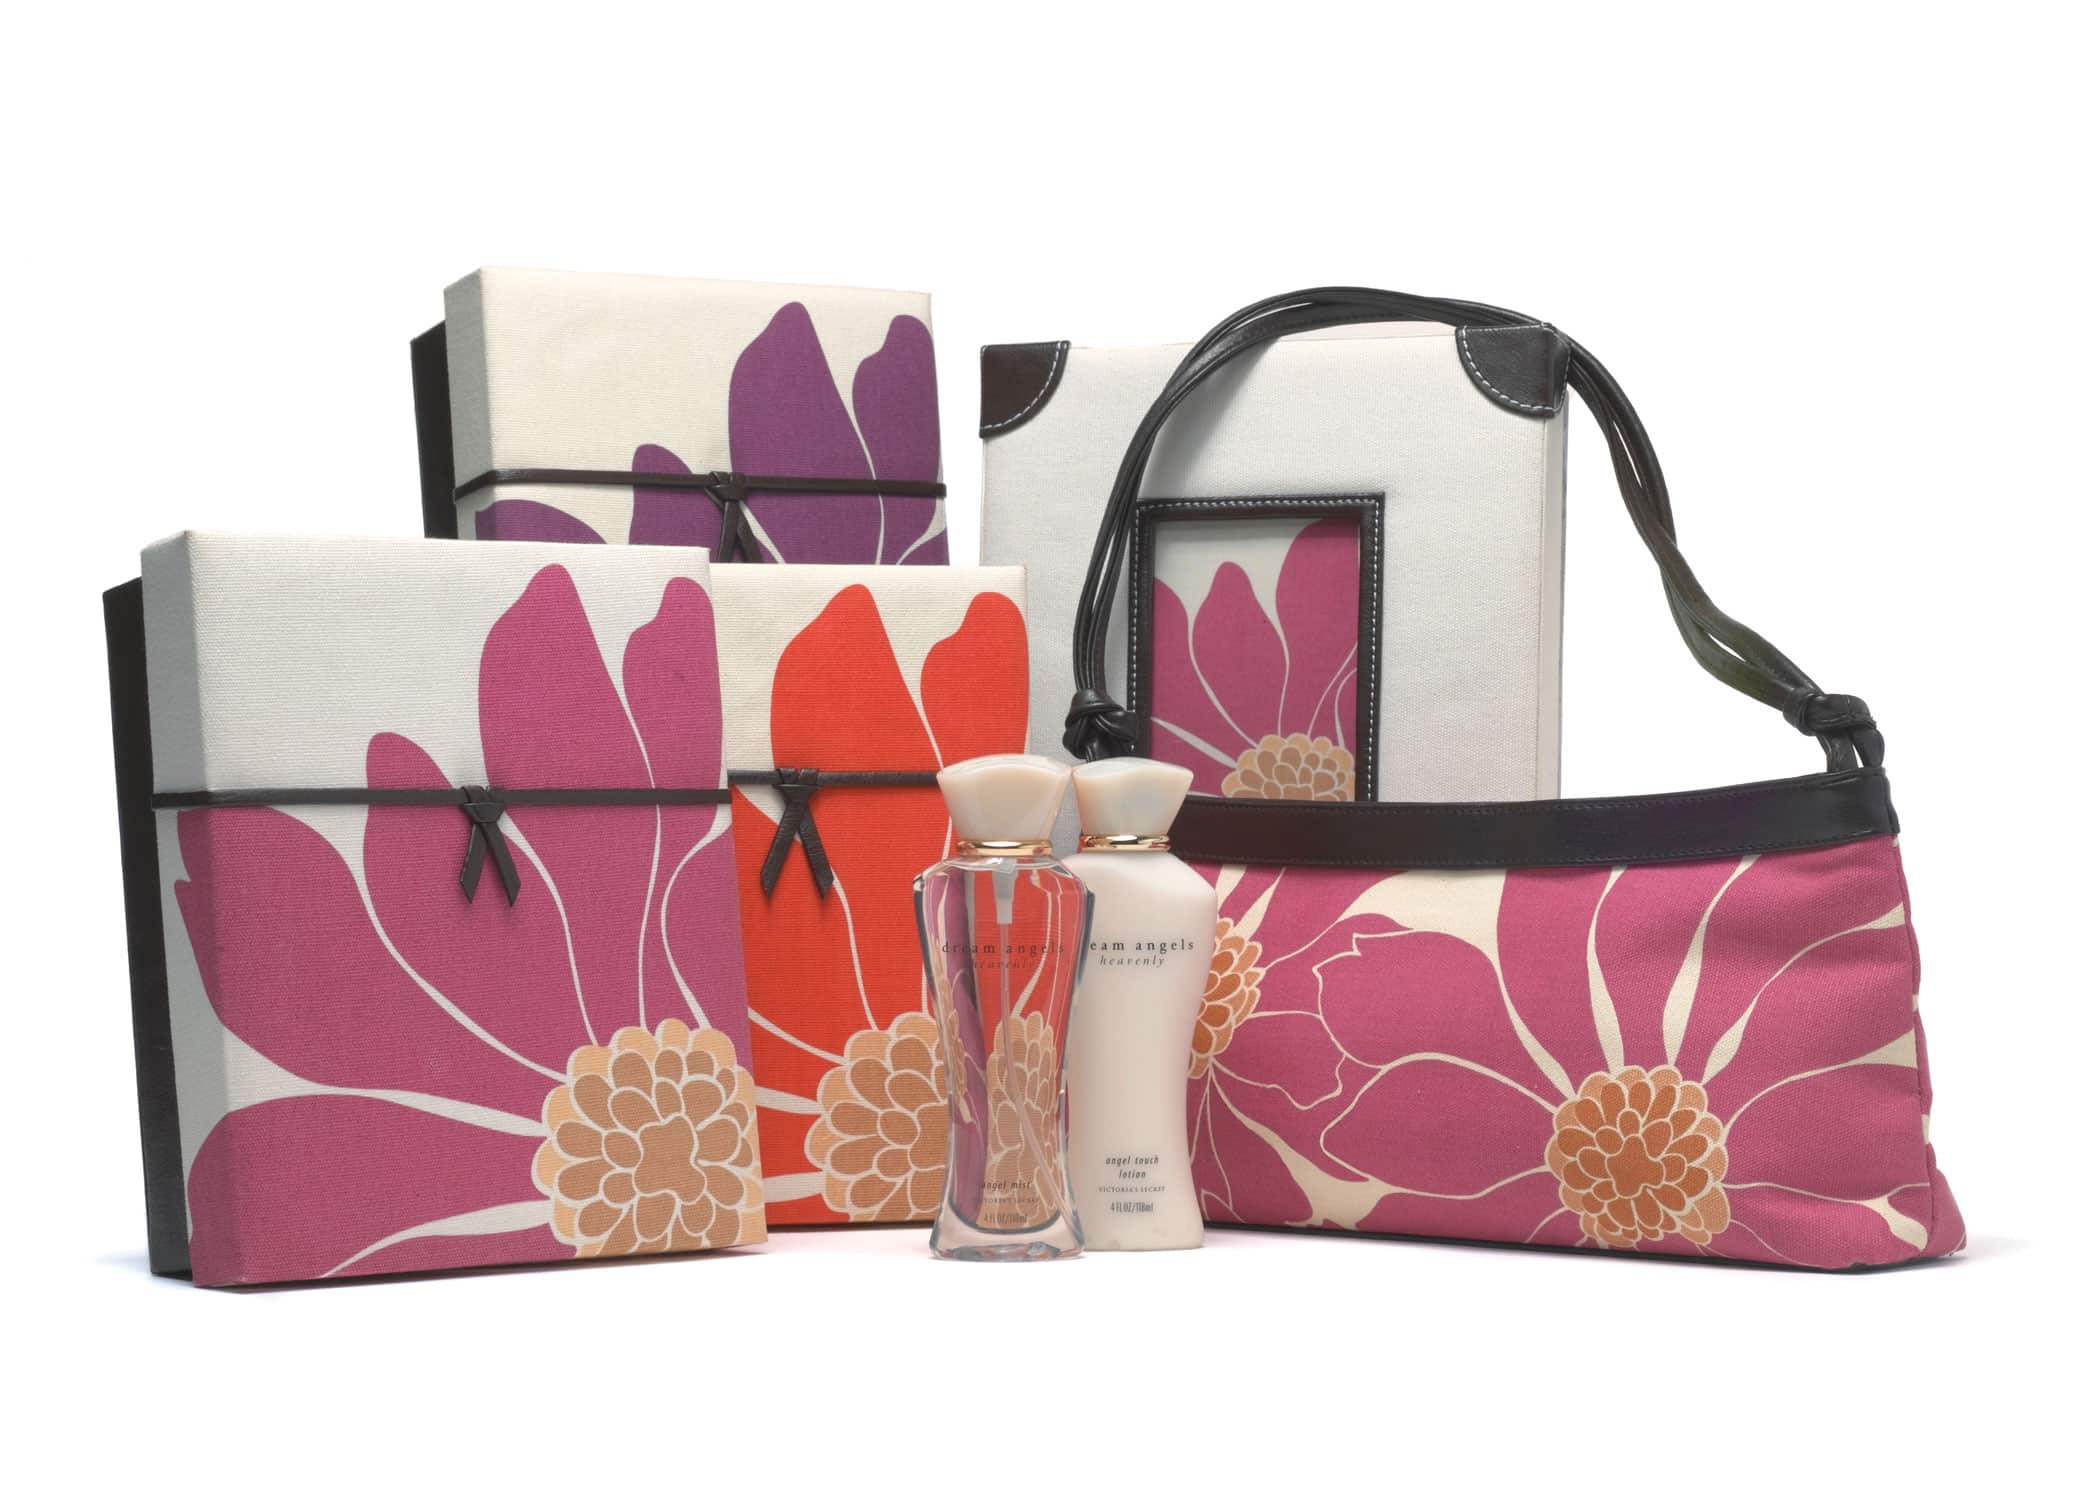 Custom gift box packaging design for Victoria's Secret Dream Angels including fragrance bottles, boxes, and handbag with mauvey floral designs.